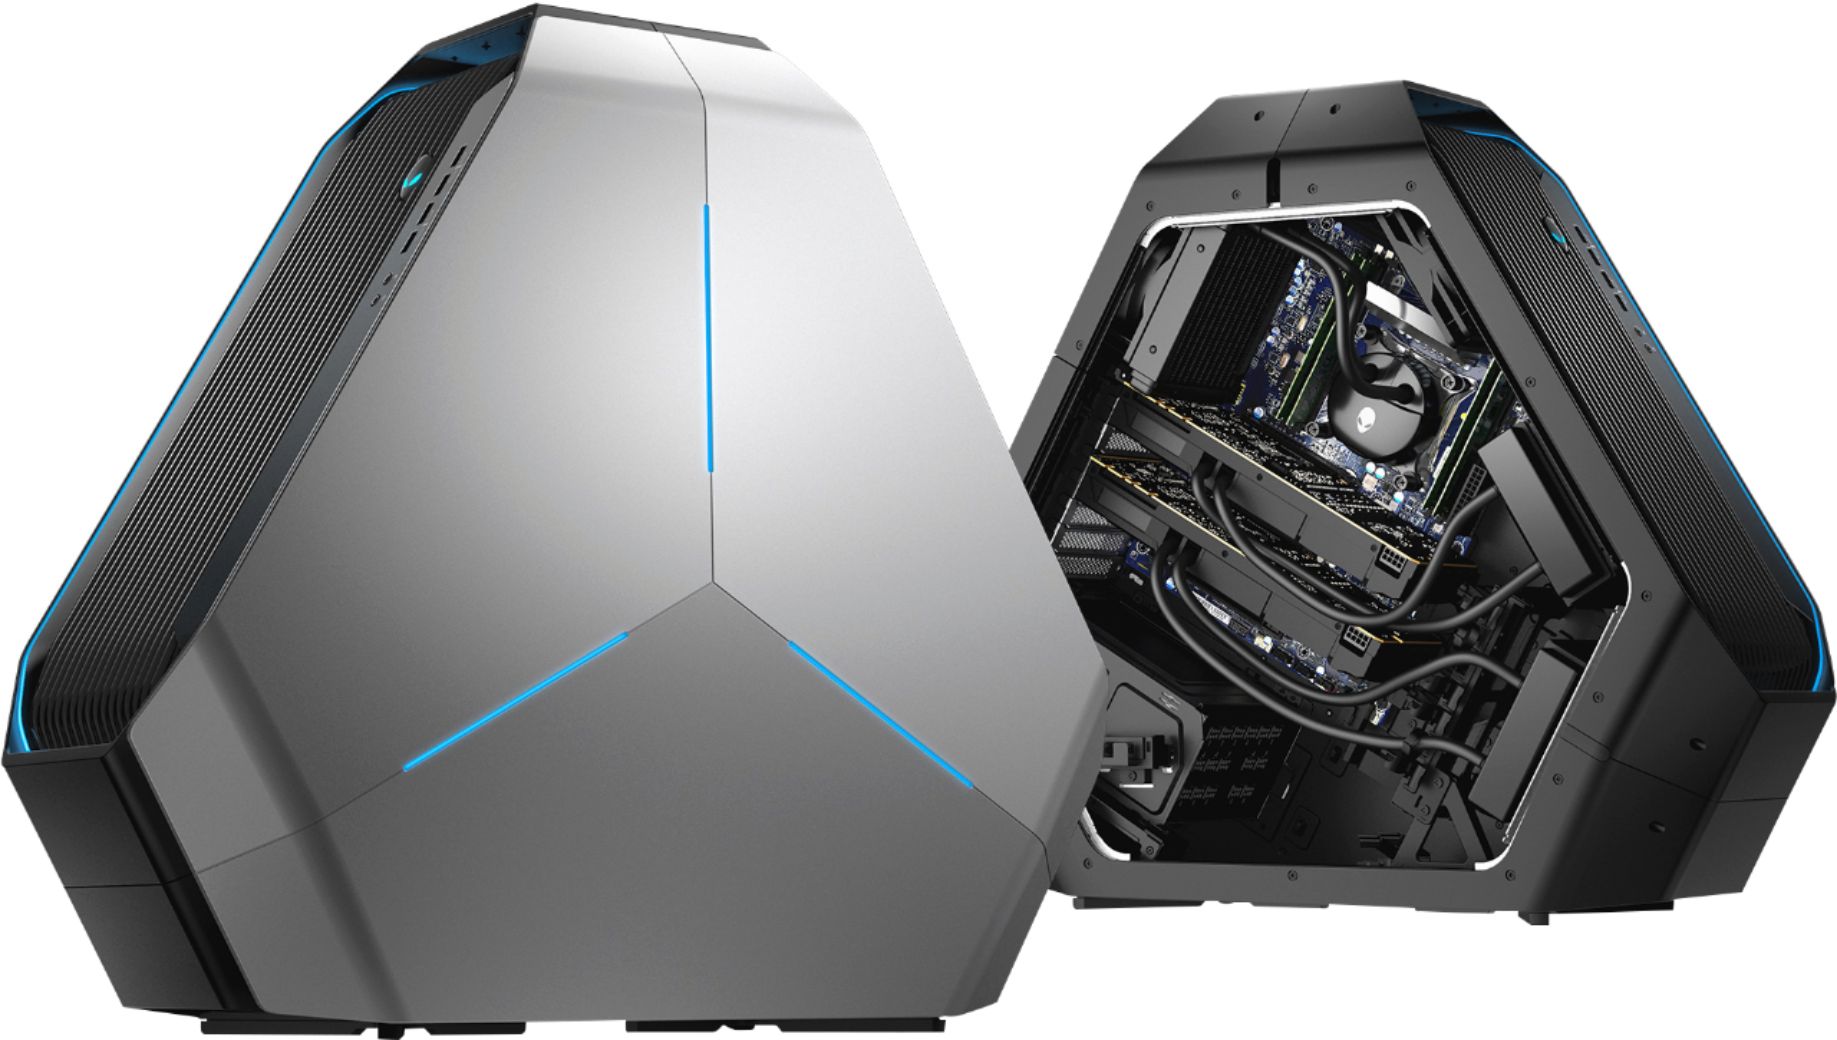 Alienware Gives PC Gaming A Much Needed Boost With Area-51 Desktop